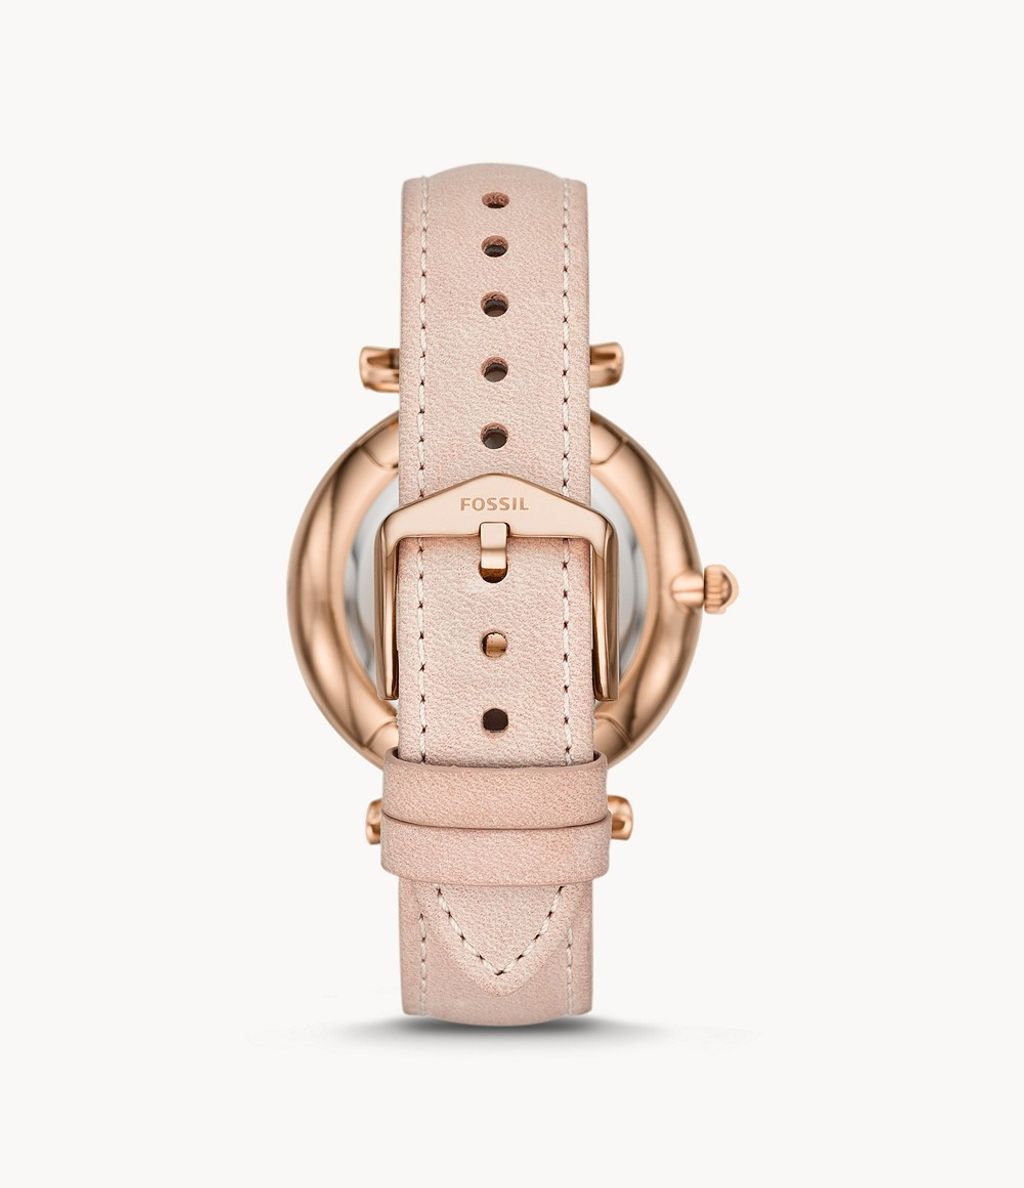 Fossil ES4544 Carlie Multifunction Rose-Gold-Tone Leather Watch